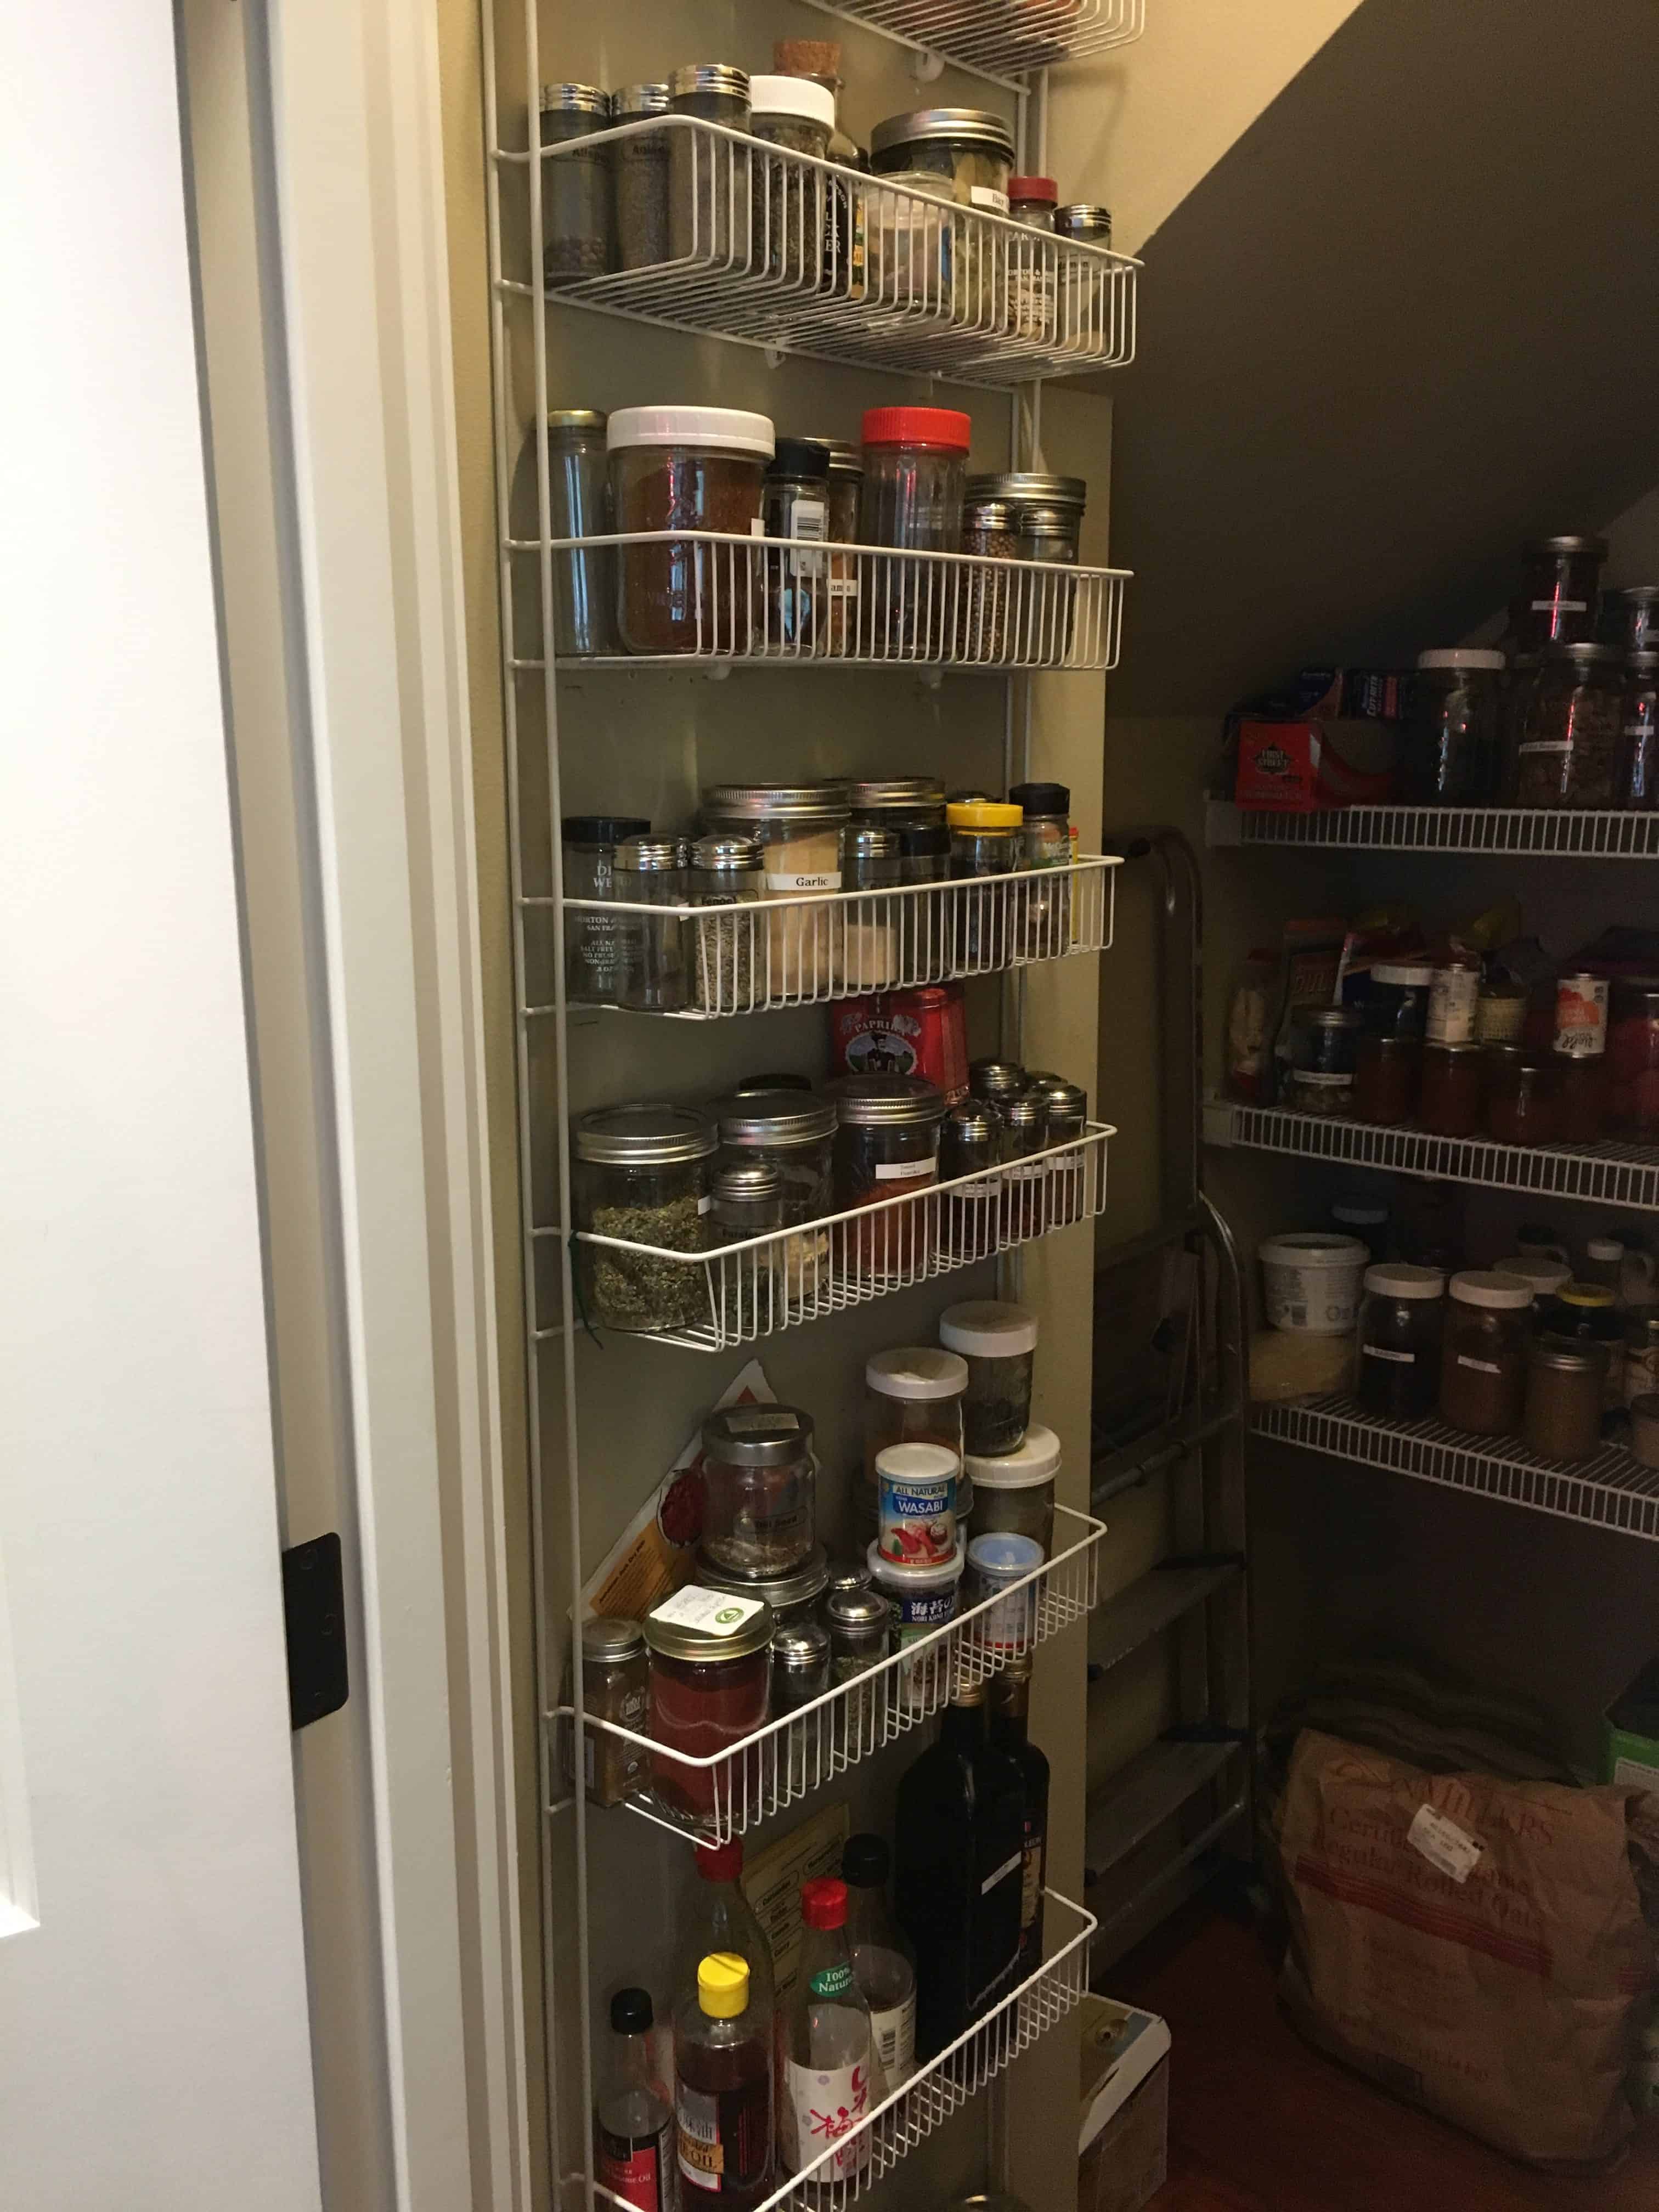 Walk-in pantry with shelves of glass storage spice jars full of vegan (whole food plant-based) foods https://trimazing.com/